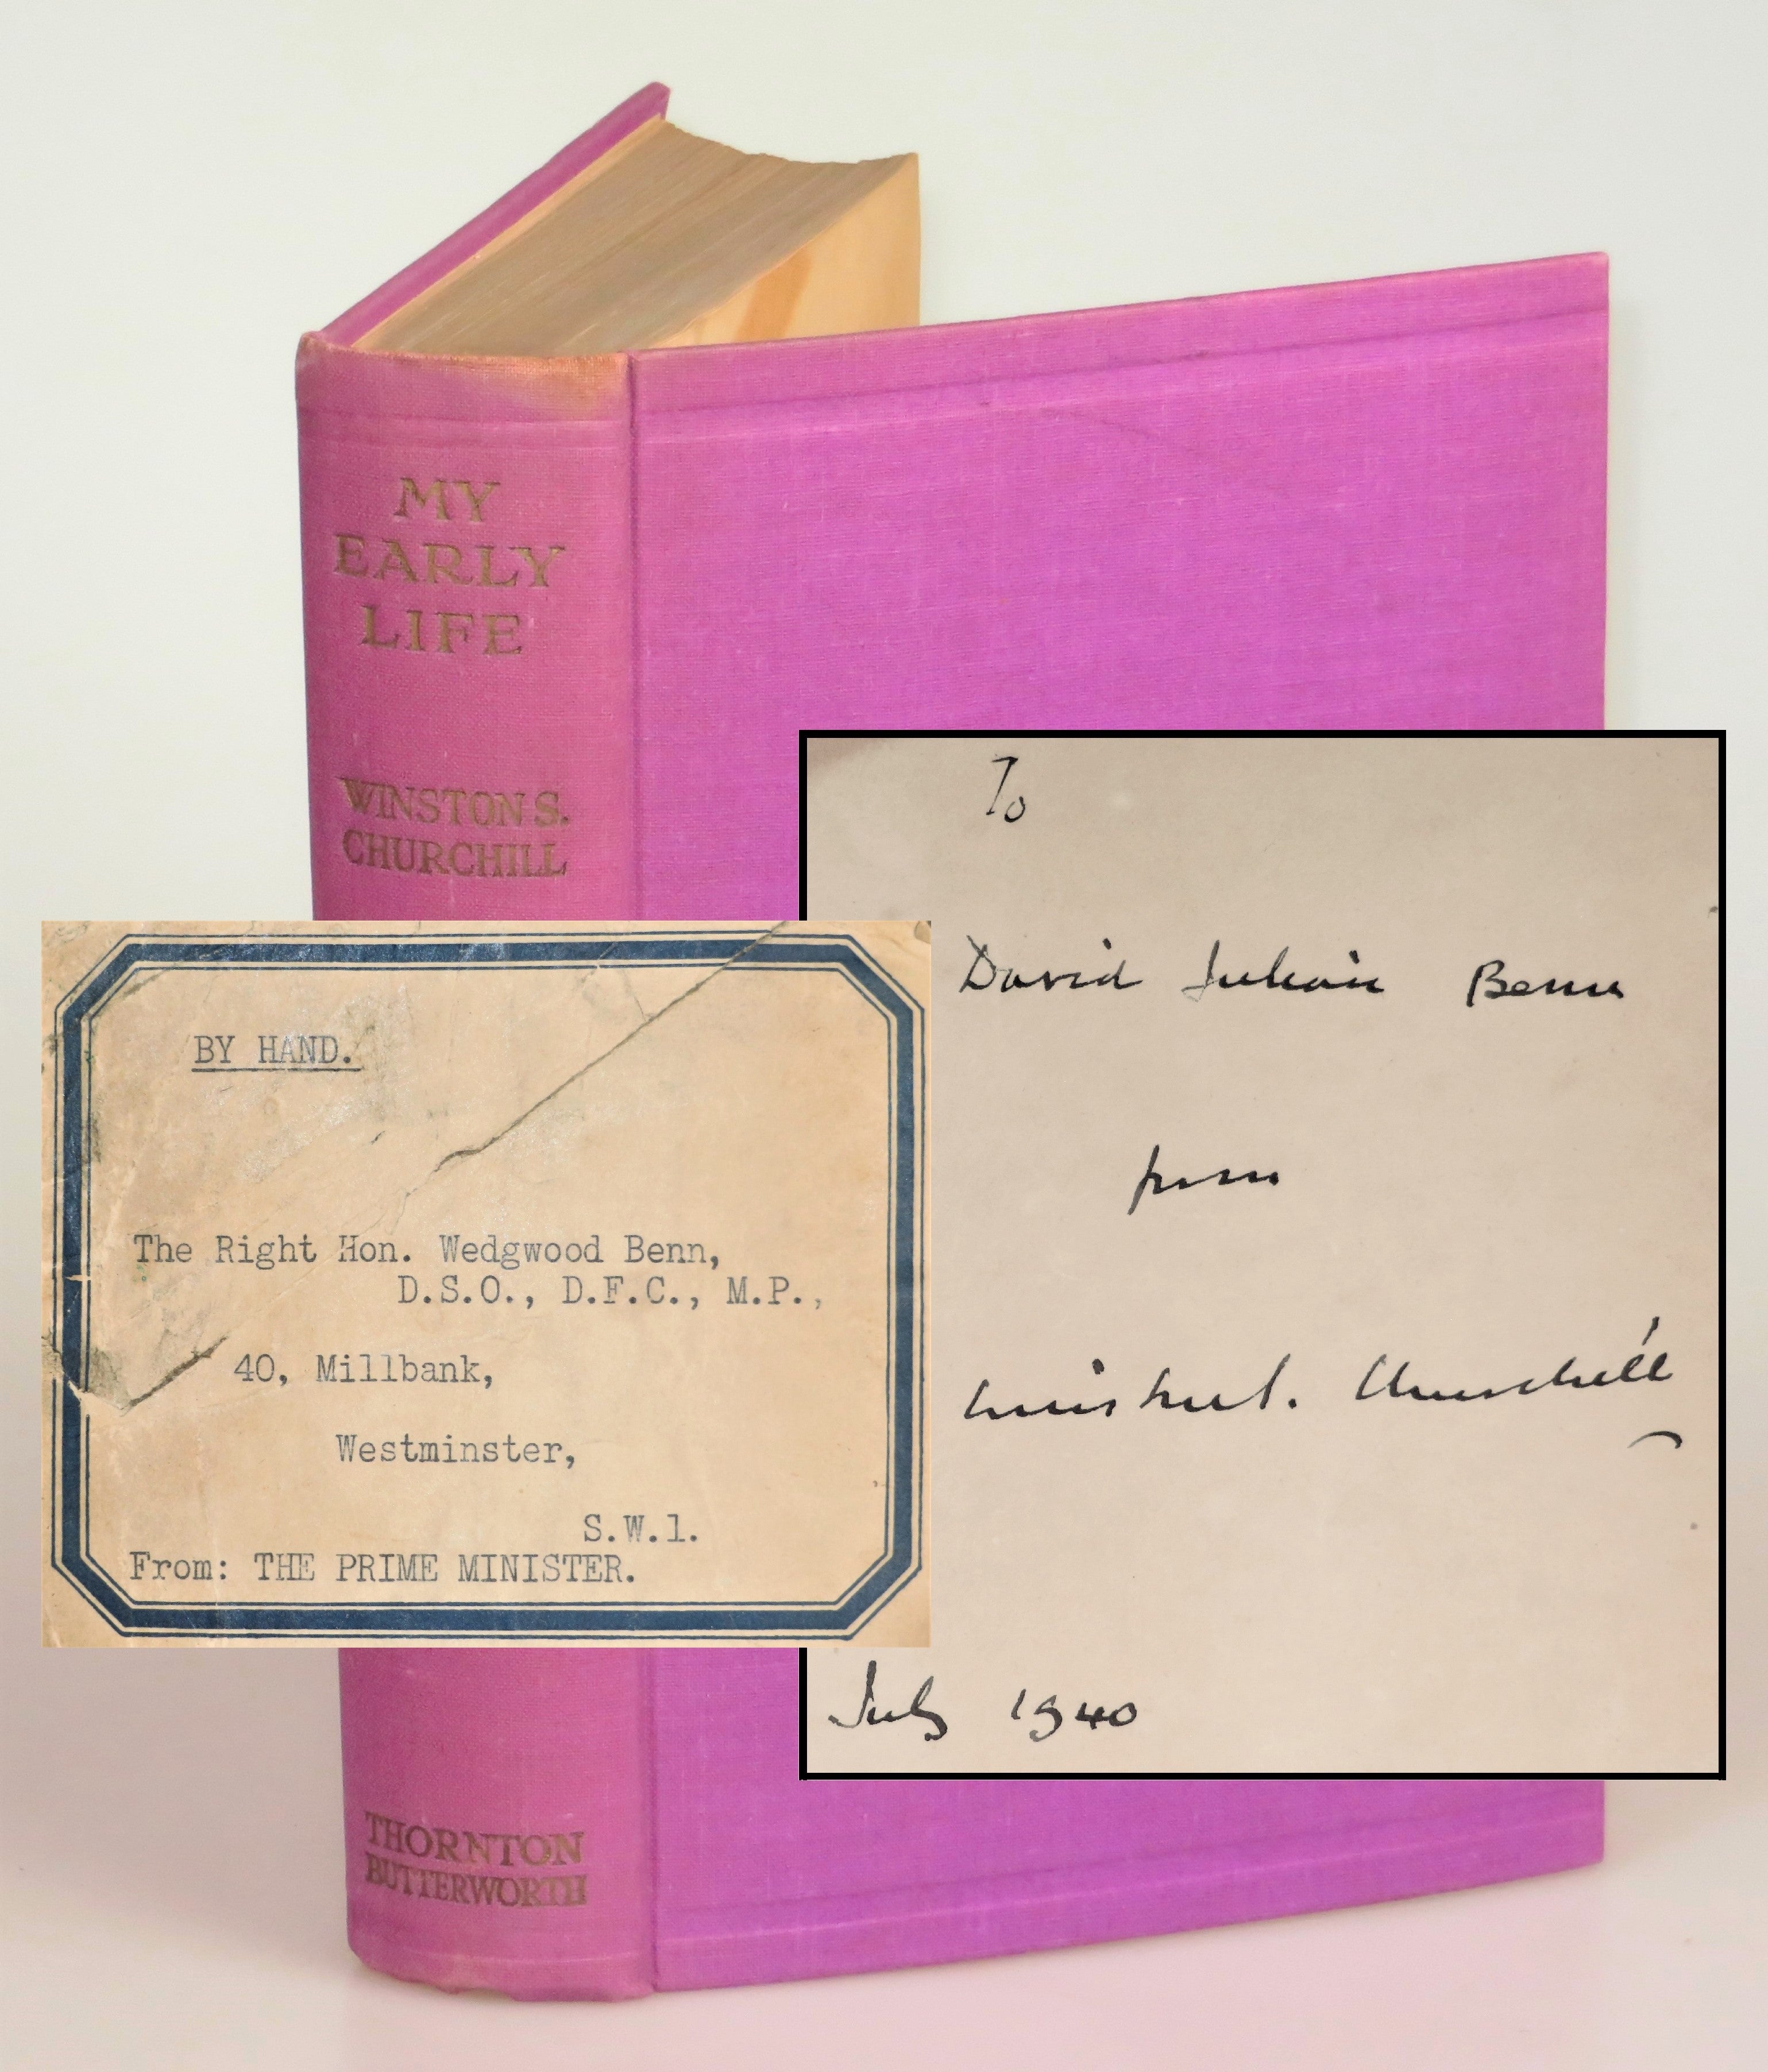 “From: THE PRIME MINISTER” – an extraordinary inscribed wartime copy of Churchill’s My Early Life